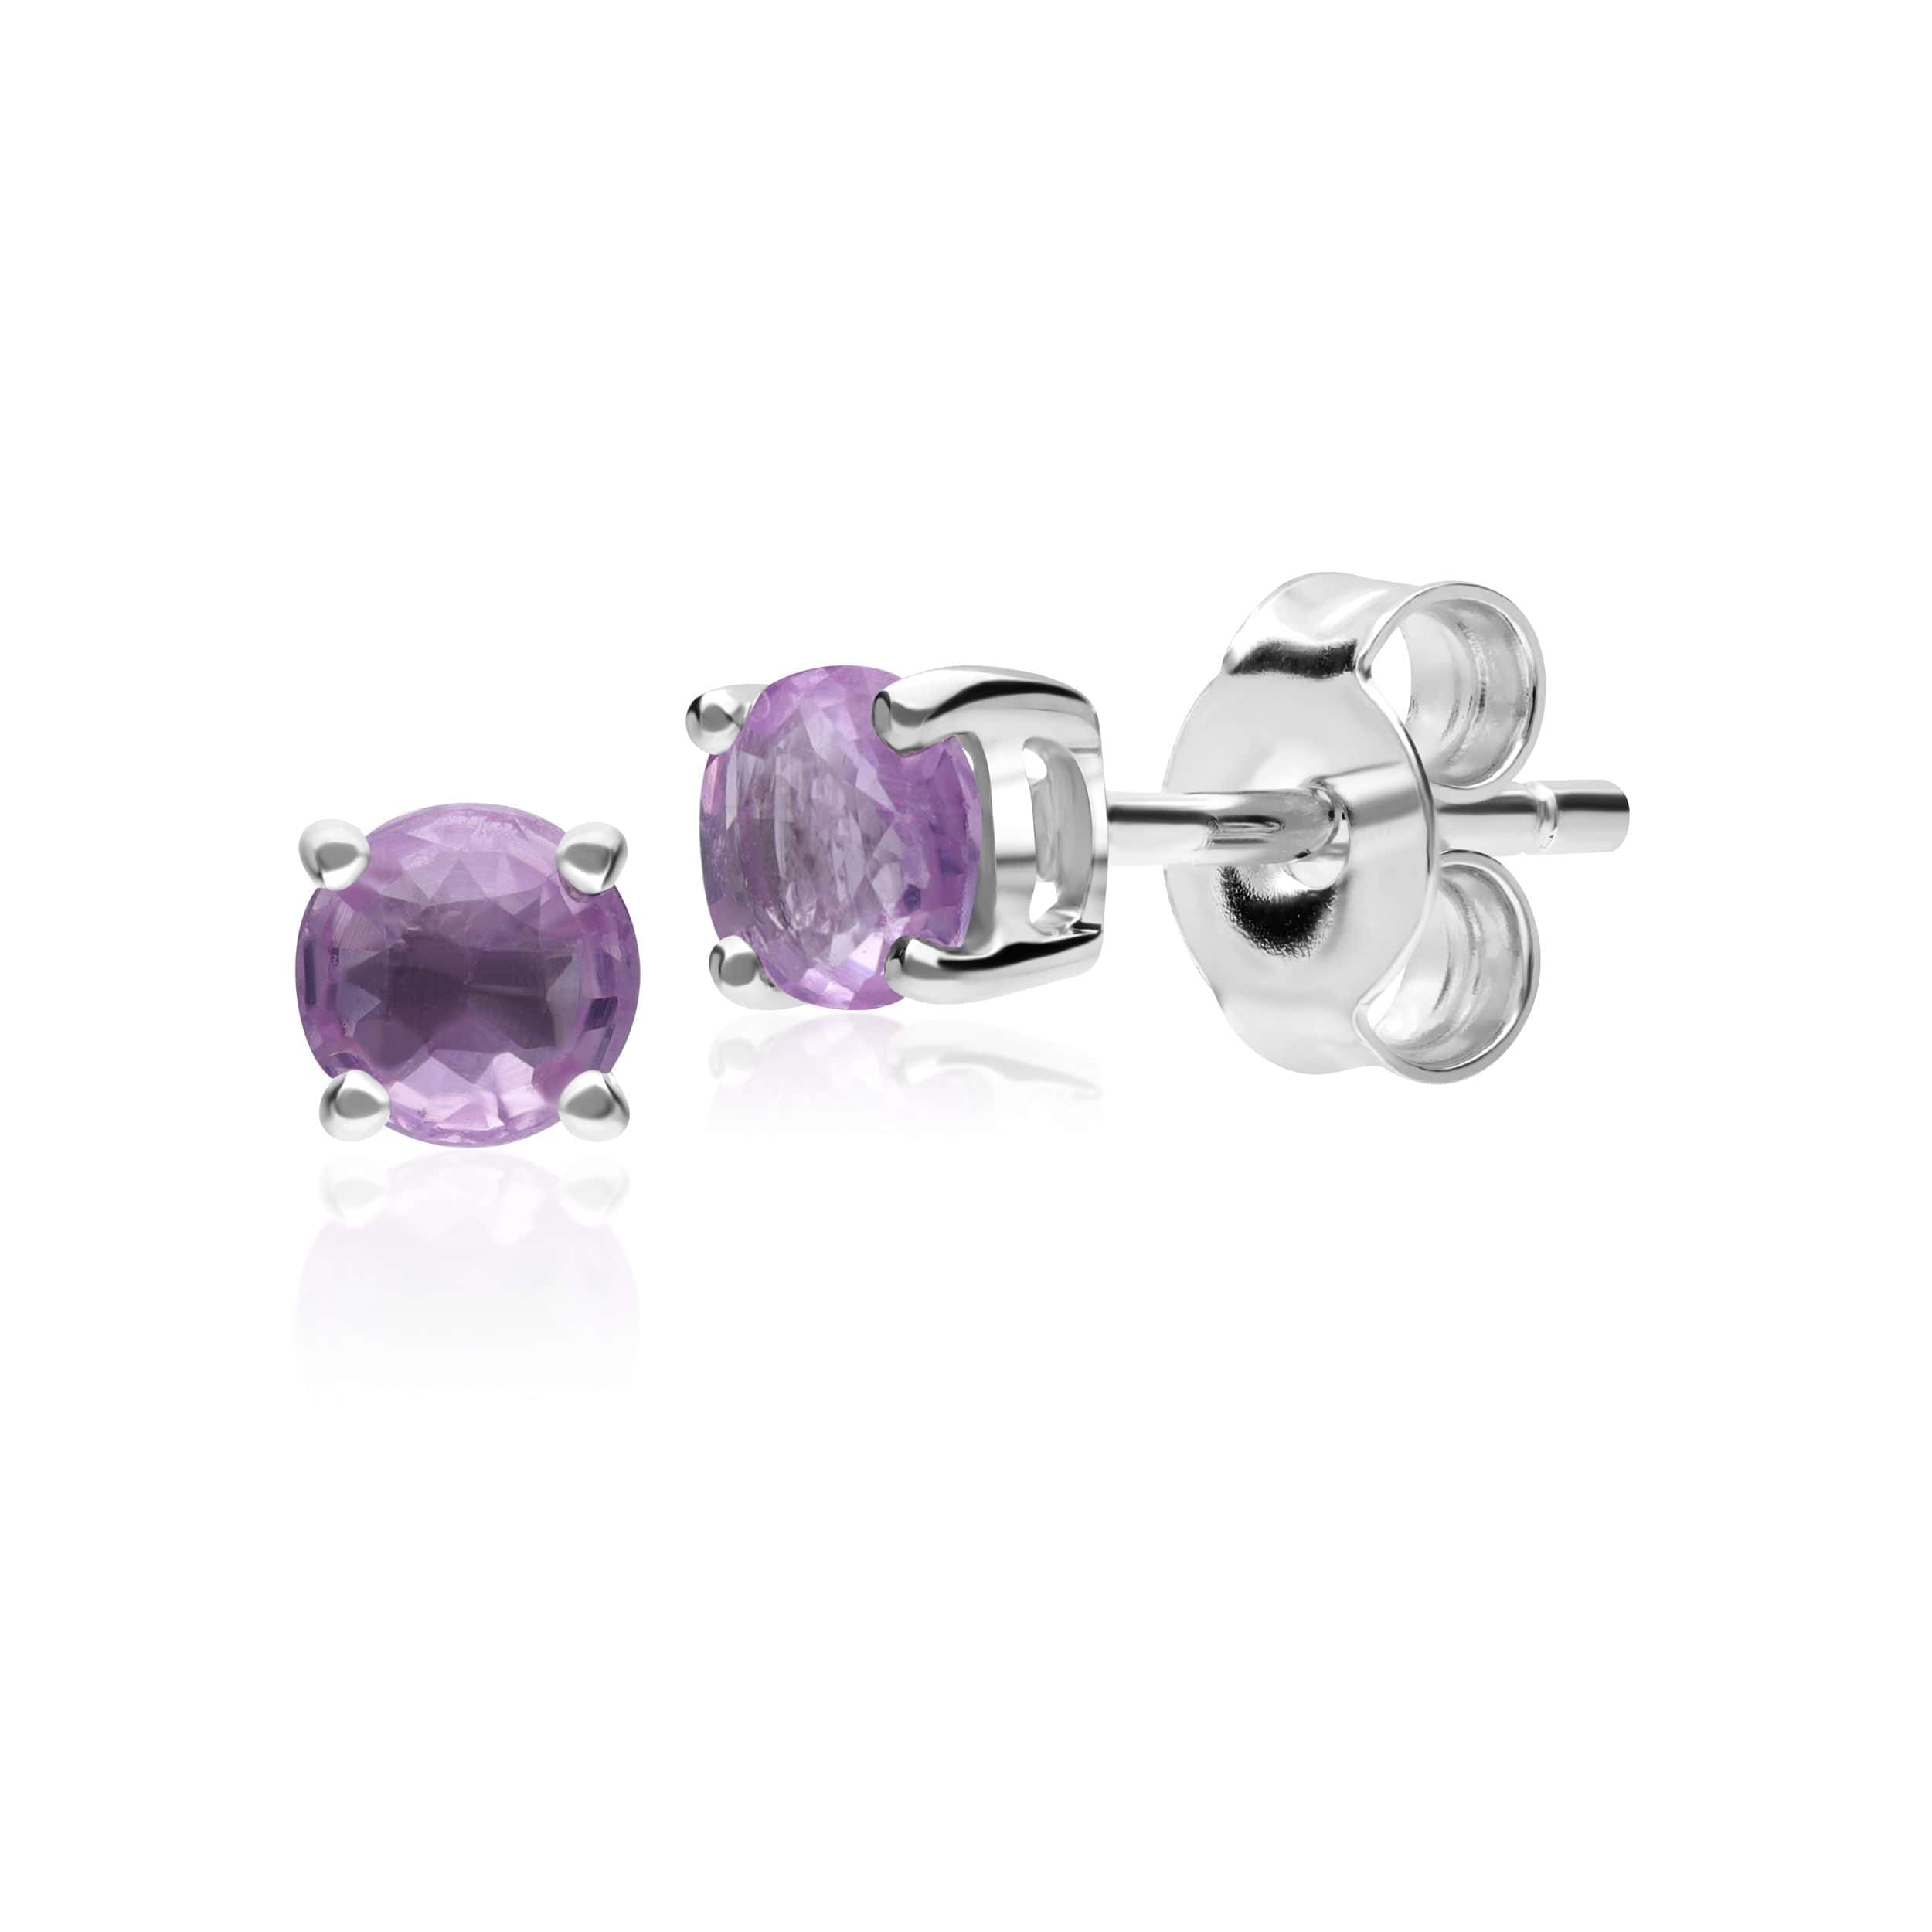 117E0031159 Classic Round Pink Sapphire Stud Earrings in 9ct White Gold 3.5mm 1